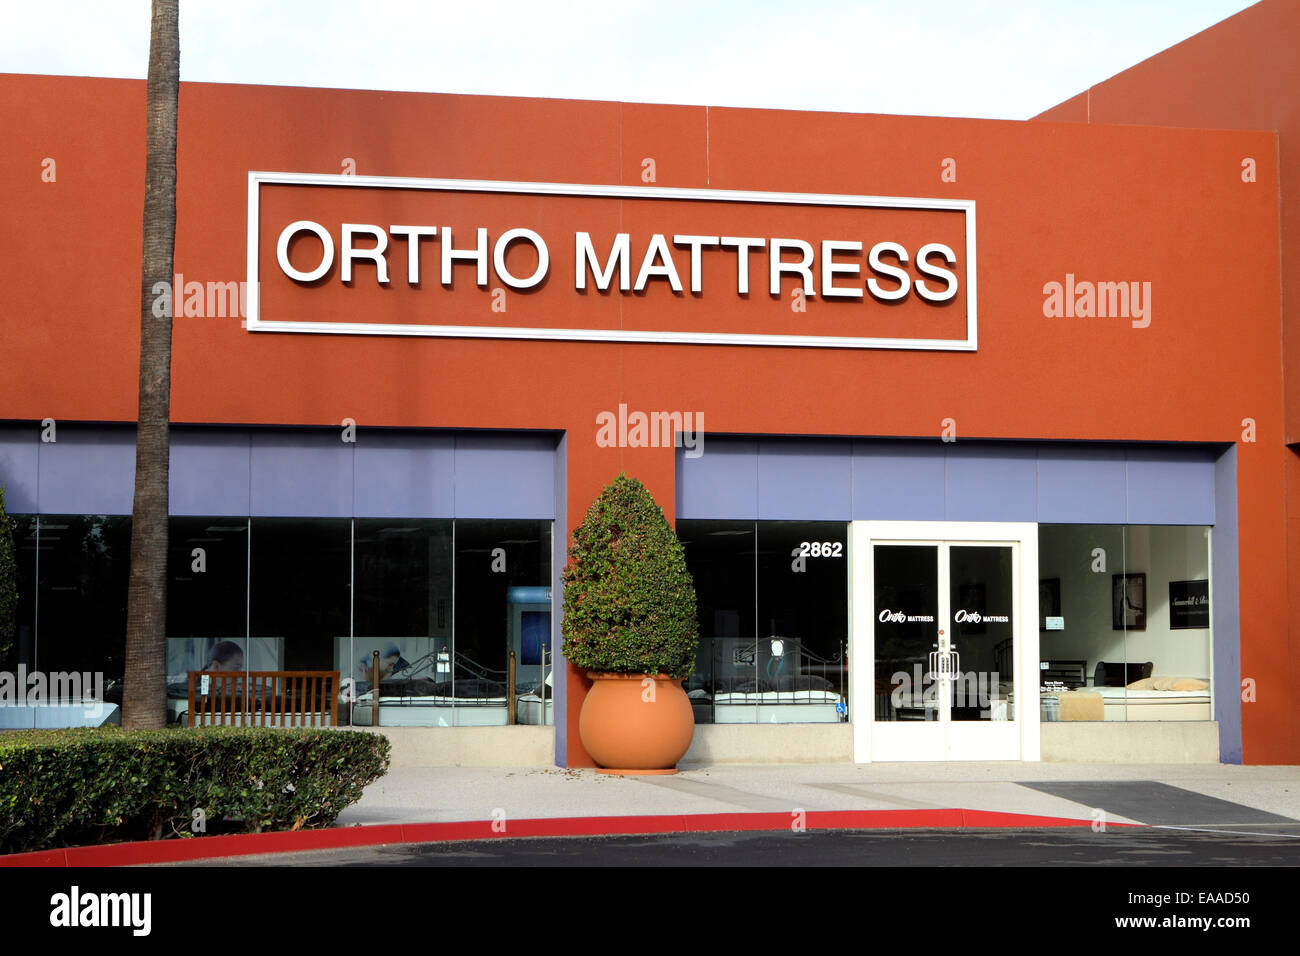 ortho mattress store culver city